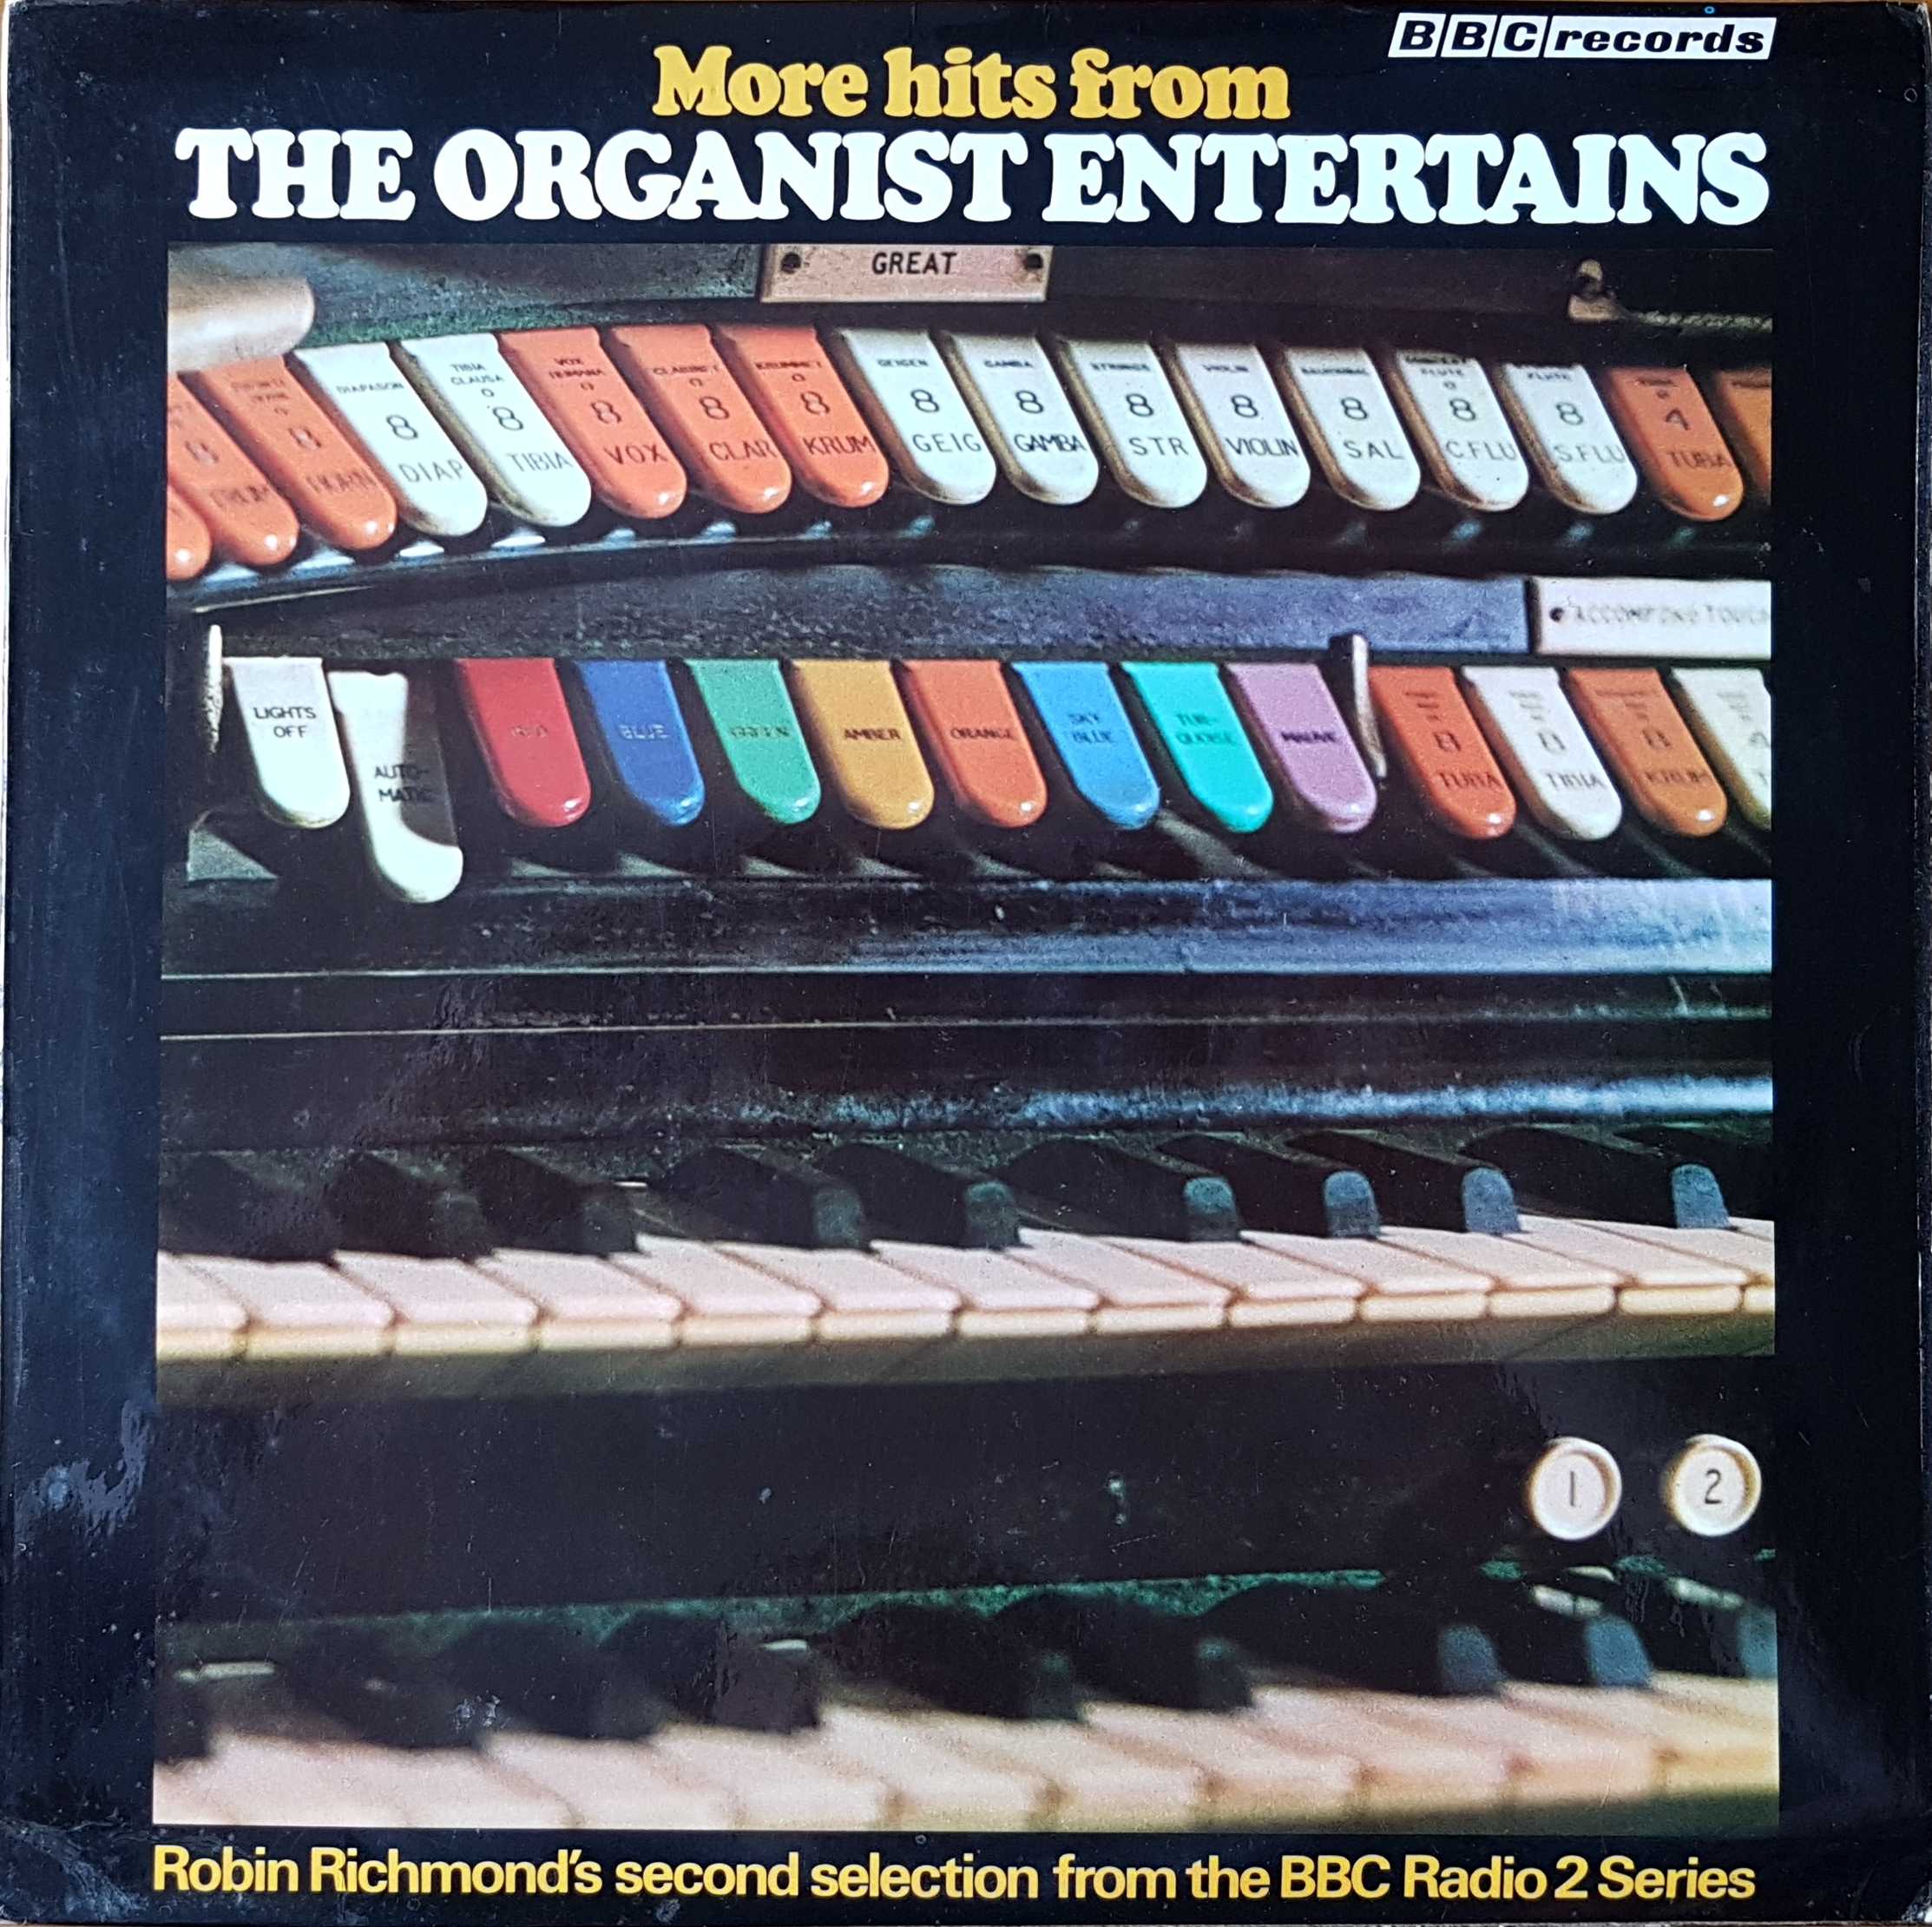 Picture of REC 110 More hits from the organist entertains by artist Various from the BBC albums - Records and Tapes library